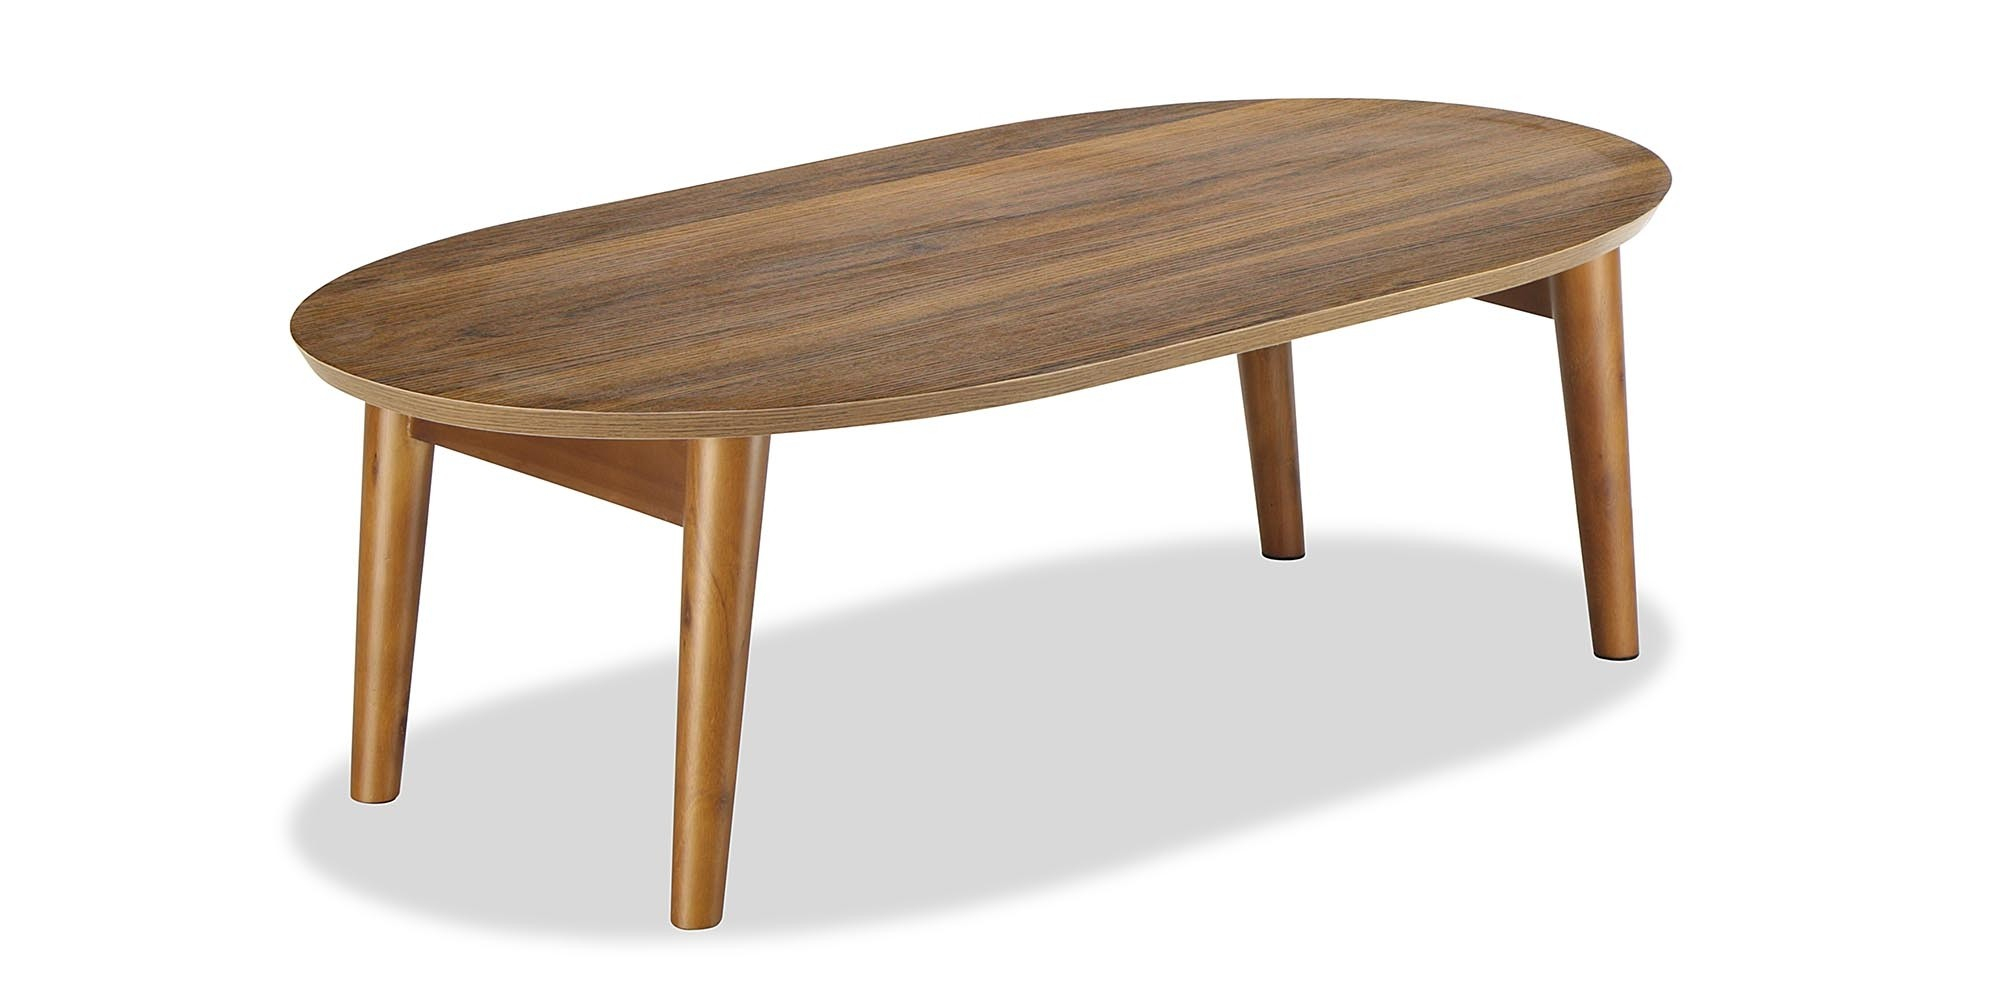 Payton Foldable Oval Coffee Table Walnut Furniture Home Dcor intended for size 2000 X 1000